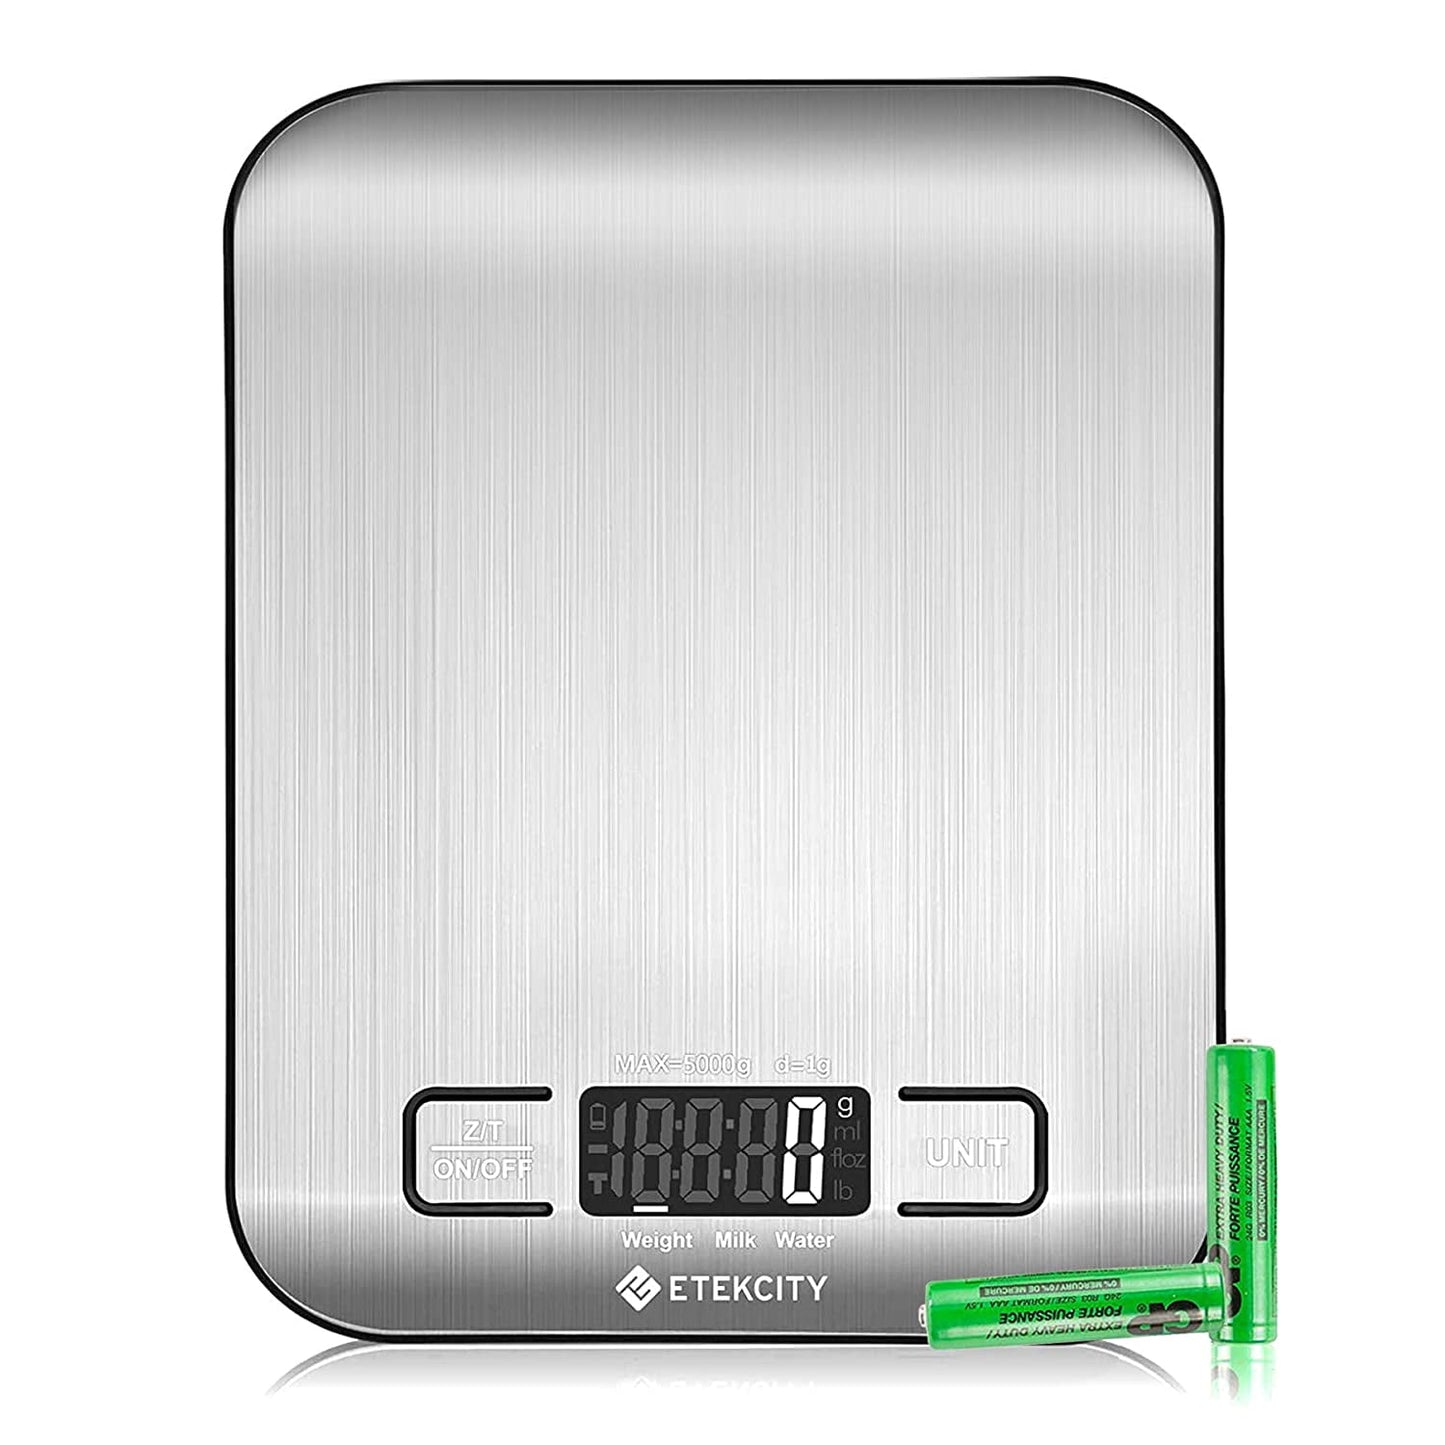 Etekcity Kitchen Scale EK6015, Digital food scale in Grams and Ounces for Weight Loss, Baking, Cooking, Keto and Meal Prep, with high-precision of 0.04oz/1g, 304 Stainless Steel, 11 lb/5kg, Silver